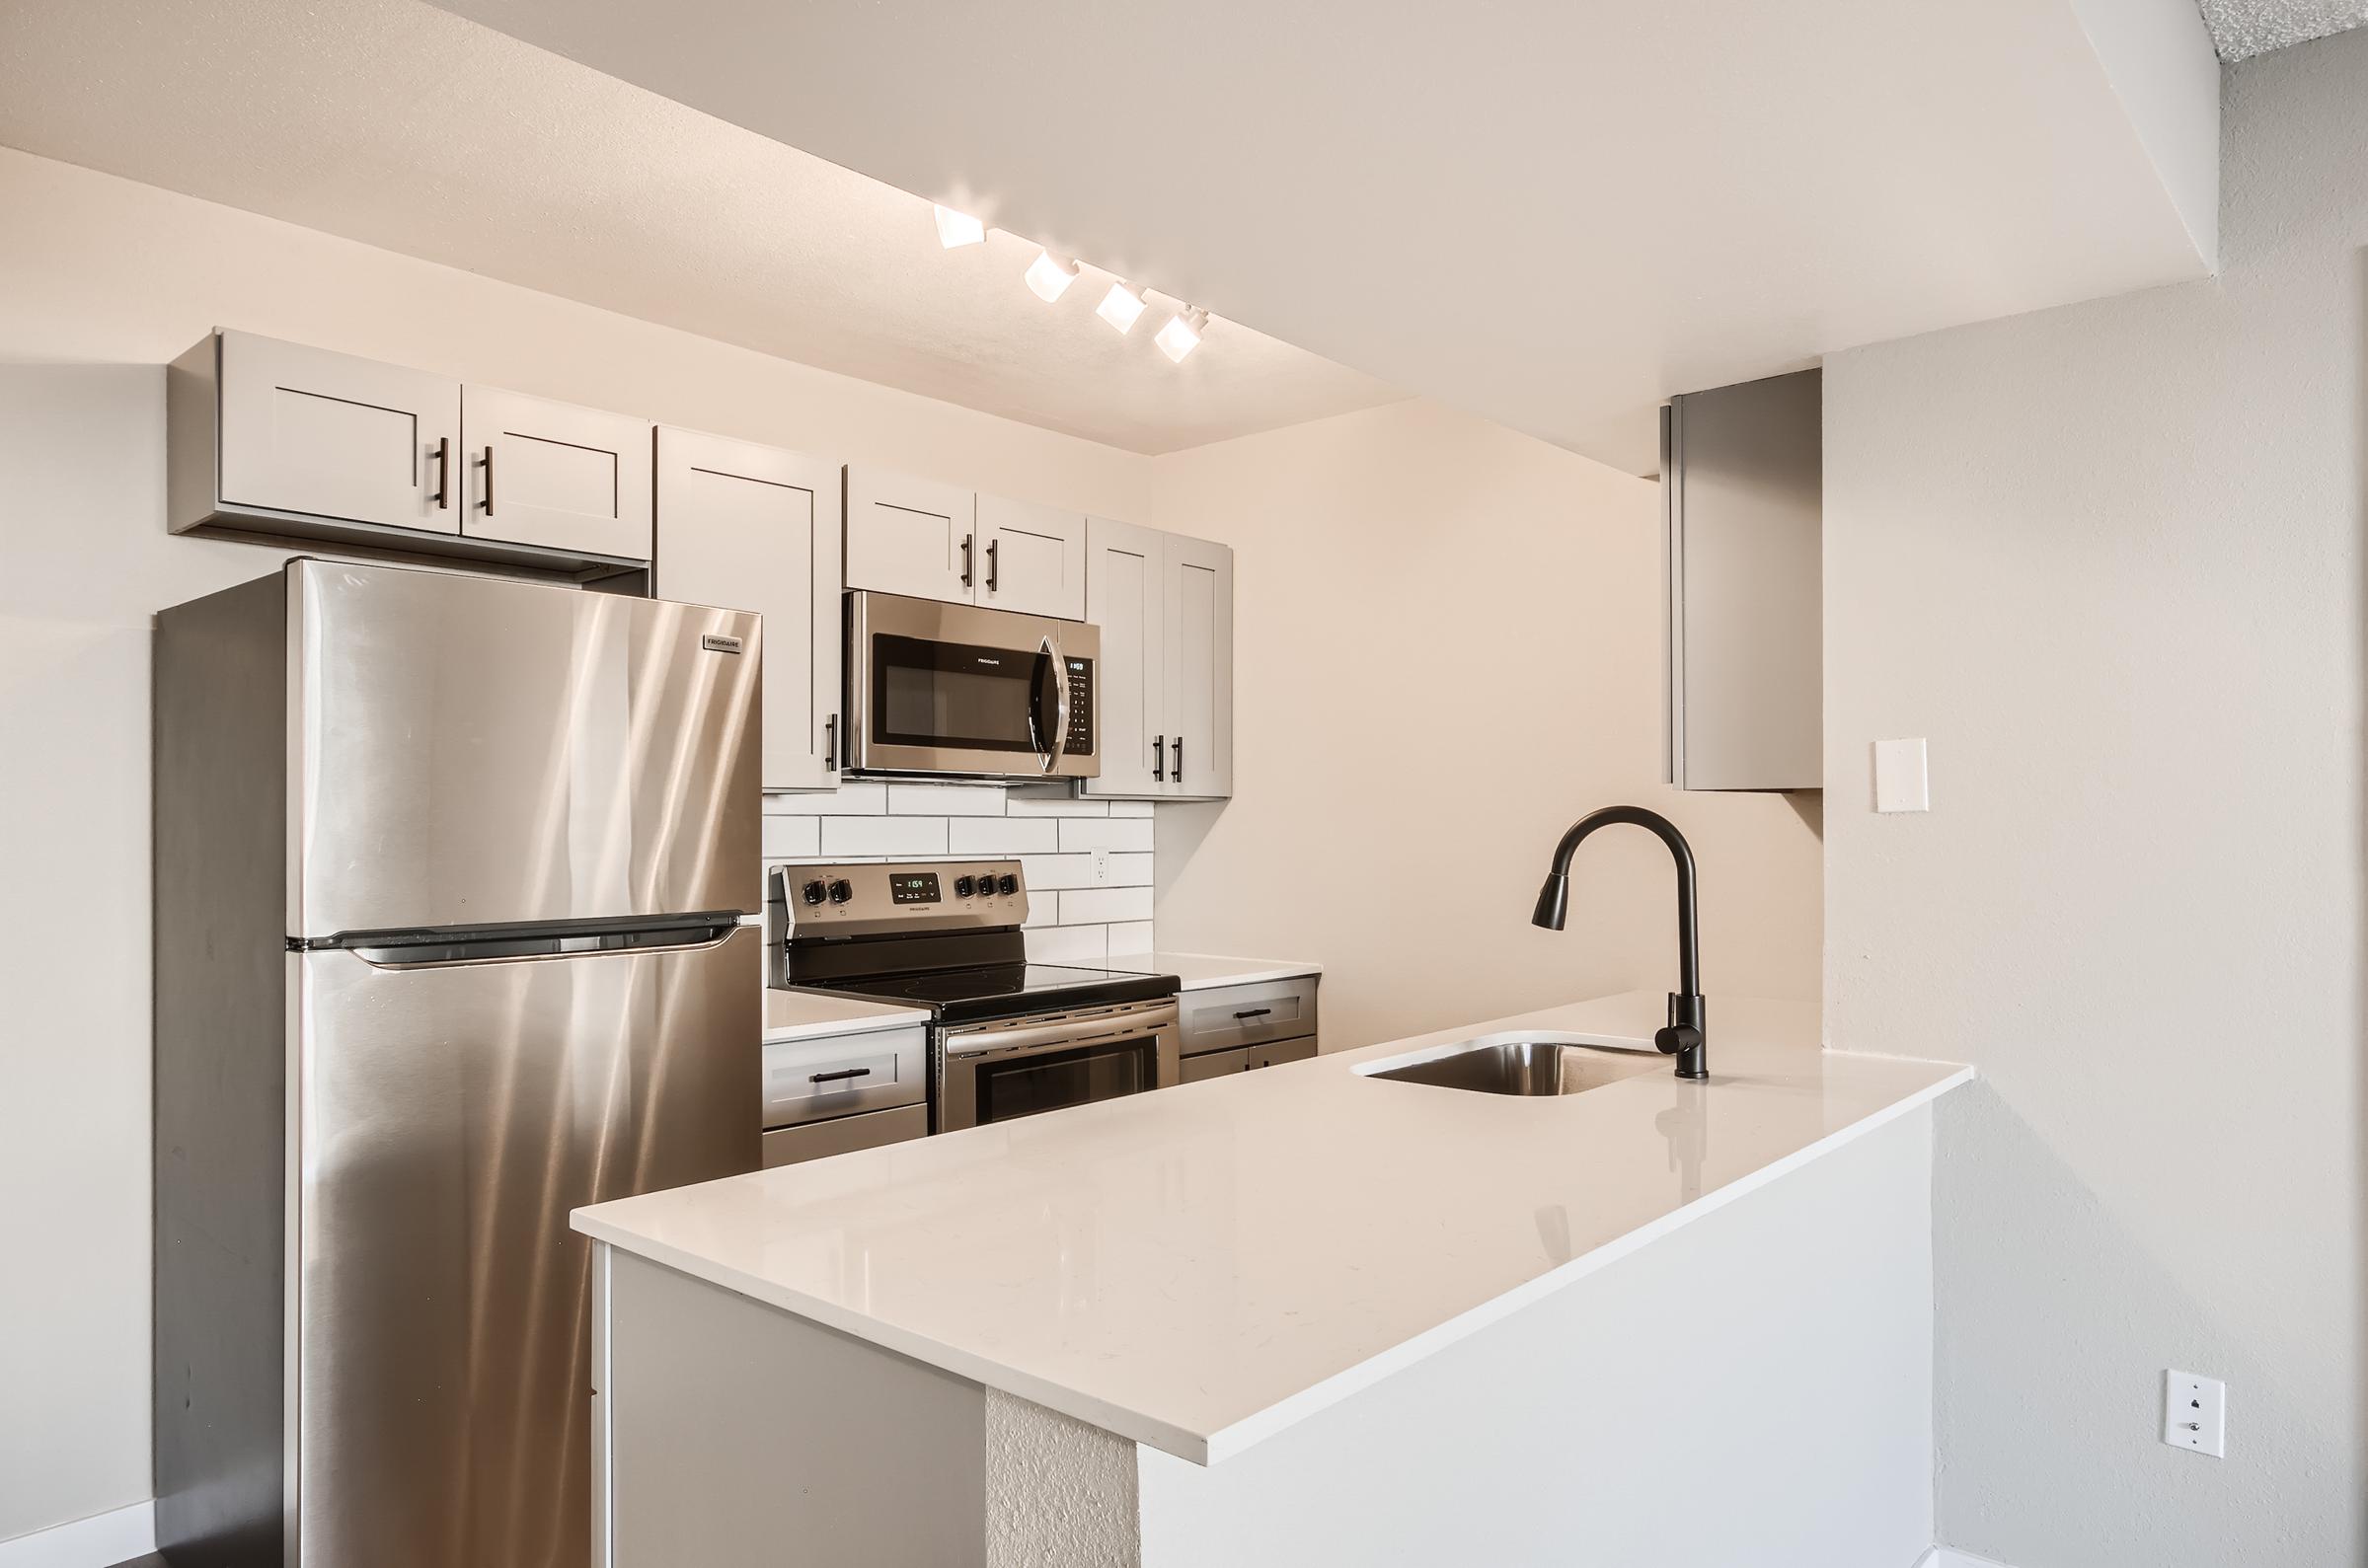 A remodeled kitchen at Rise on McClintock with quartz countertops, stainless steel appliances, and white shaker cabinets.